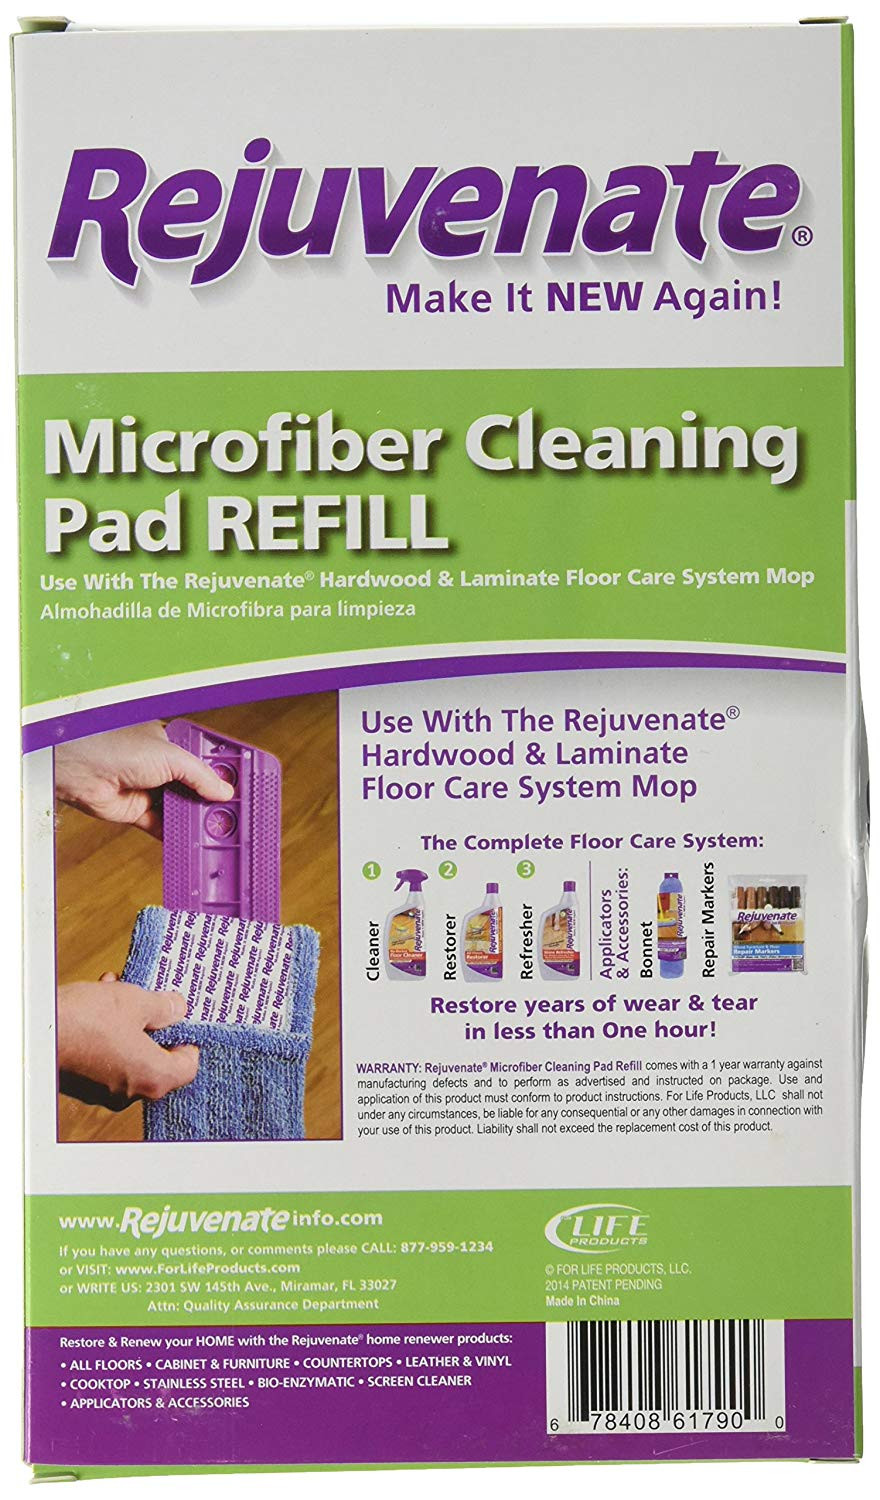 rejuvenate hardwood floor cleaner of amazon com rejuvenate microfiber cleaning pad refill fits hardwood regarding amazon com rejuvenate microfiber cleaning pad refill fits hardwood laminate floor care system mop use with all rejuvenate floor cleaning and